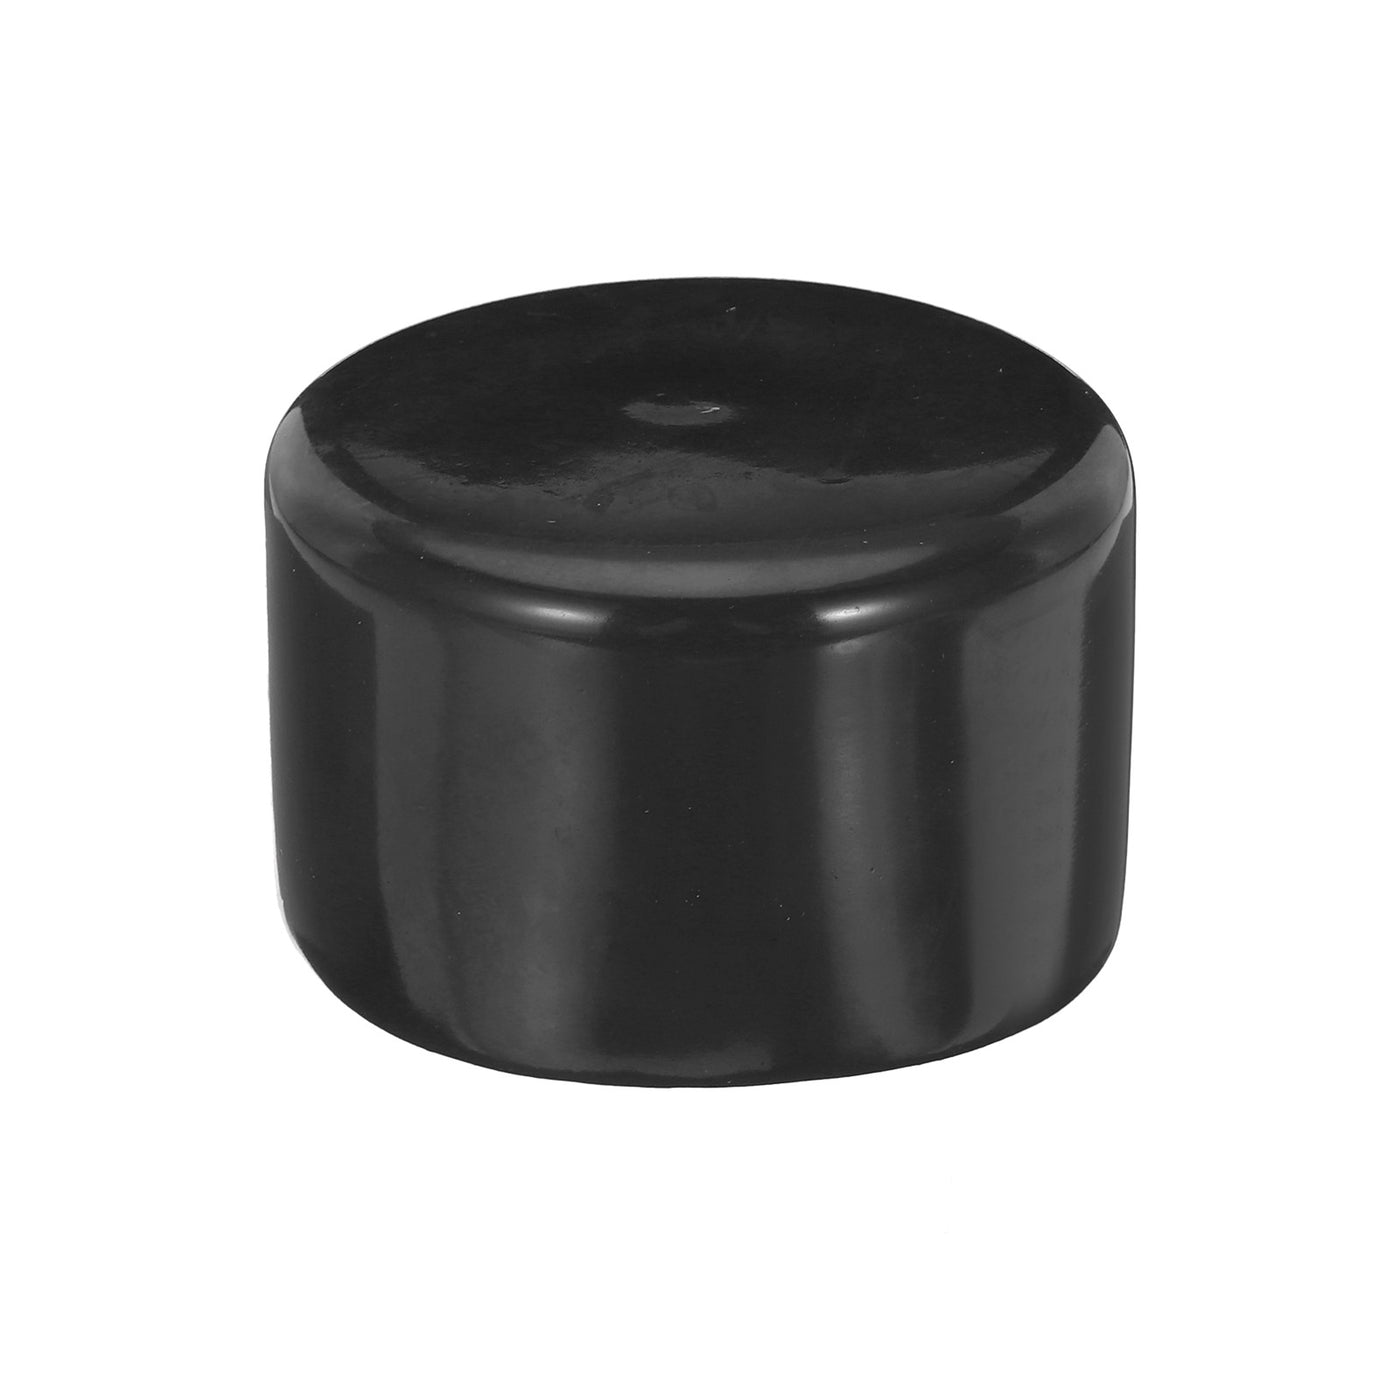 uxcell Uxcell Rubber End Caps 85mm ID Vinyl Round Tube Bolt Cap Cover Screw Thread Protectors Black